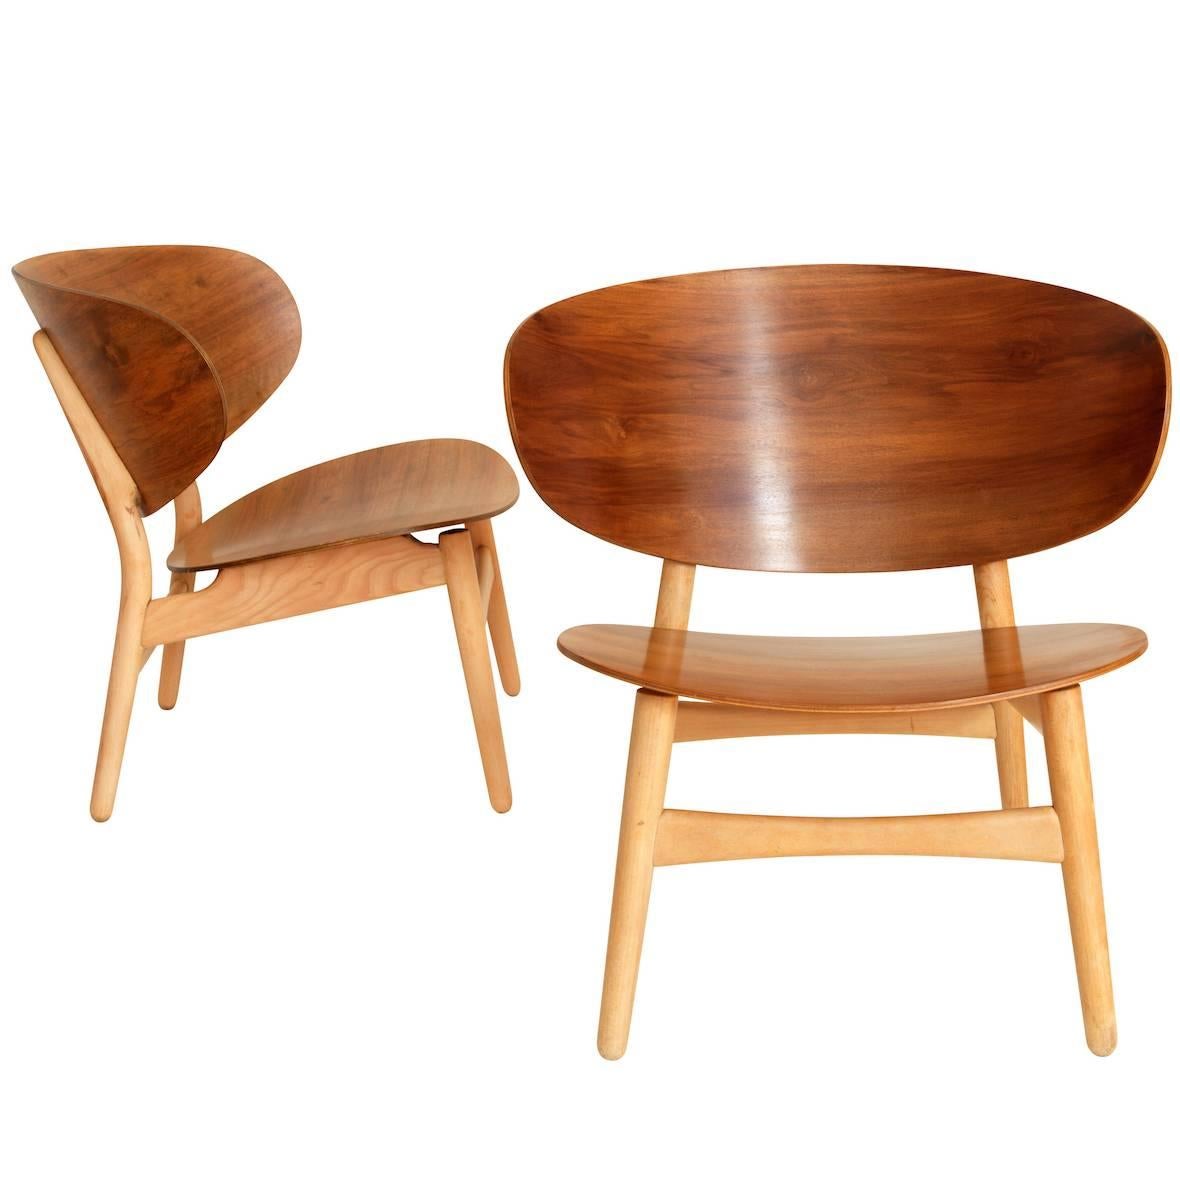 Pair of Shell Chairs, Model "FH 1936"